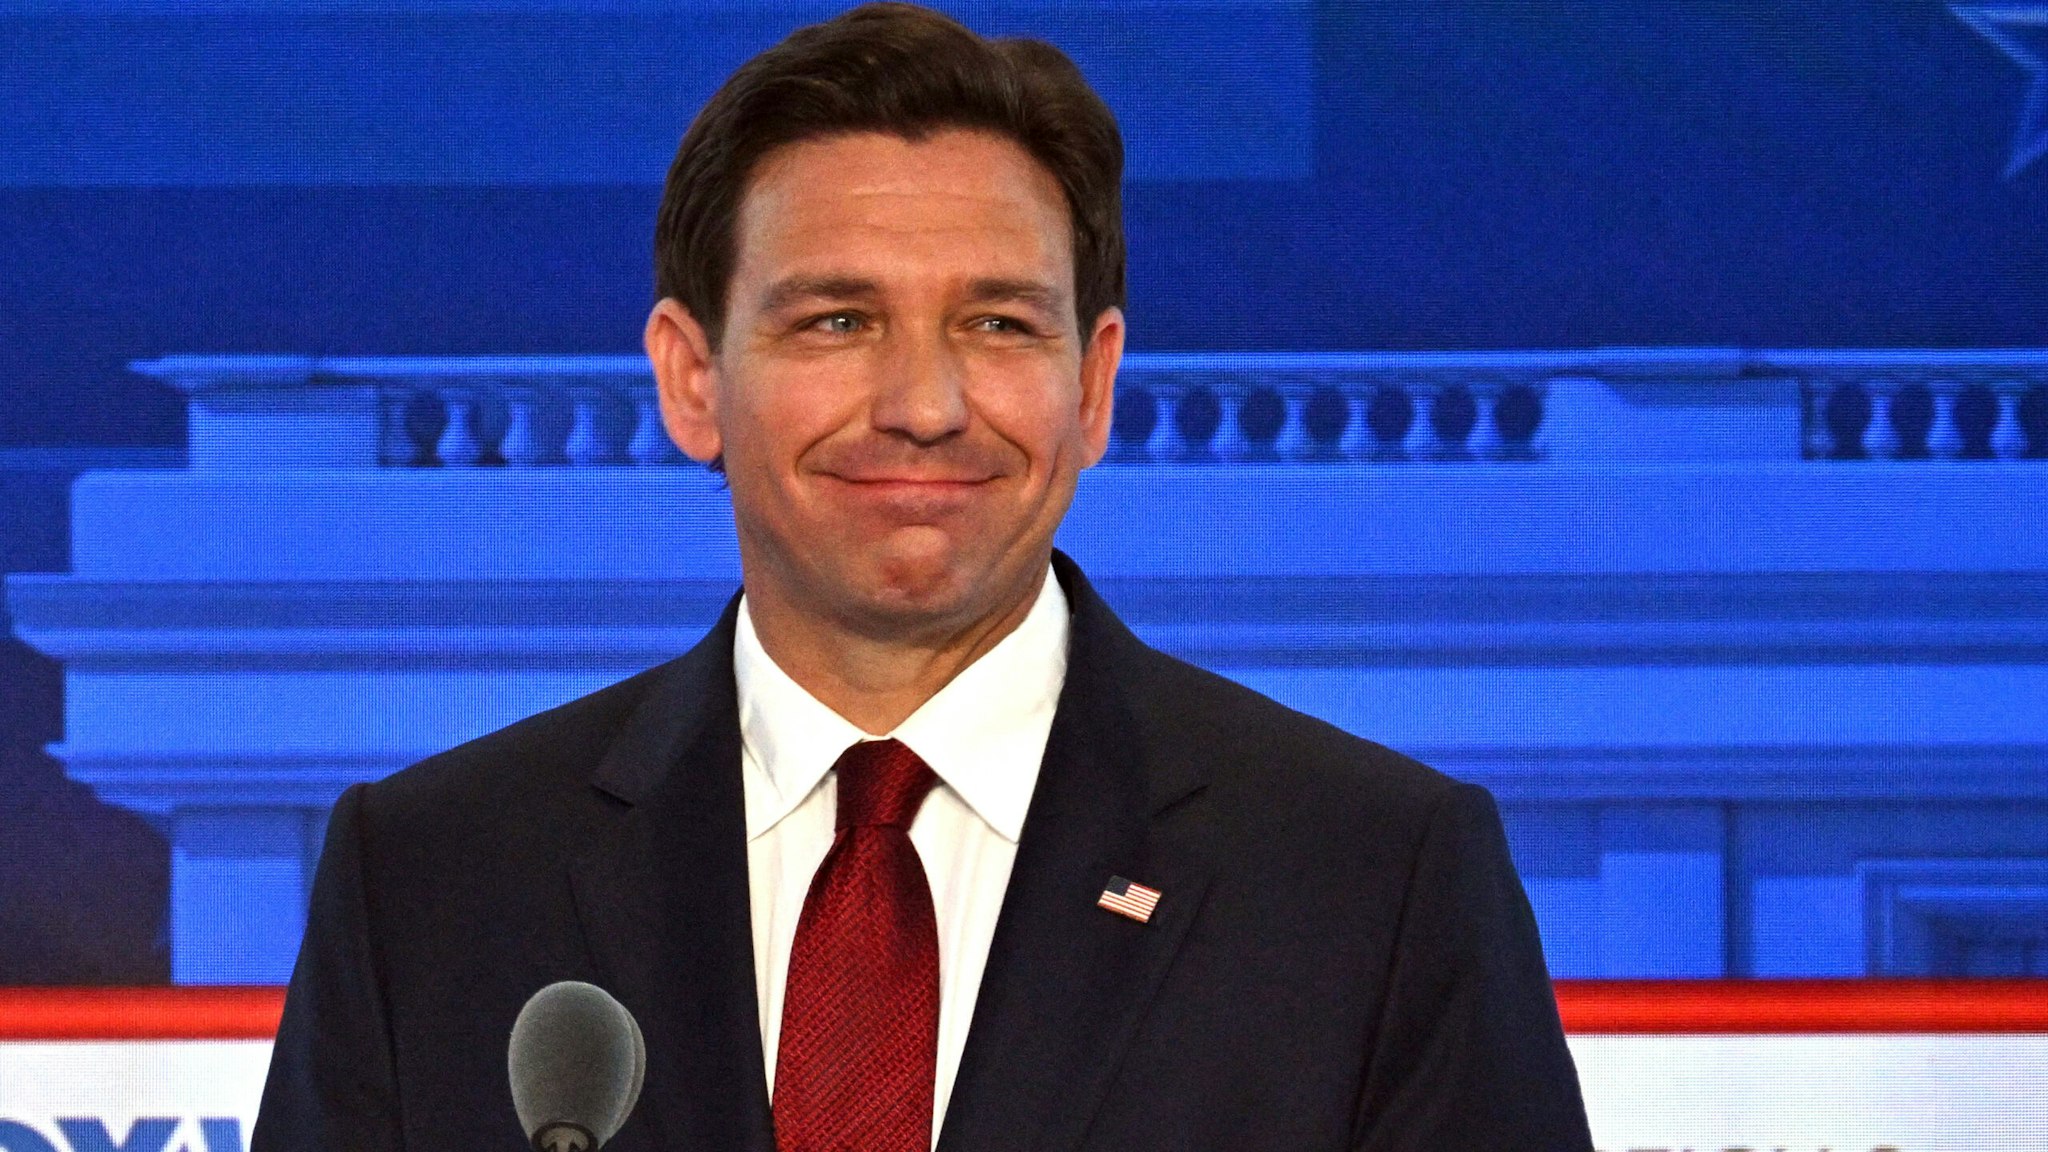 Florida Governor Ron DeSantis looks on during the second Republican presidential primary debate at the Ronald Reagan Presidential Library in Simi Valley, California, on September 27, 2023.